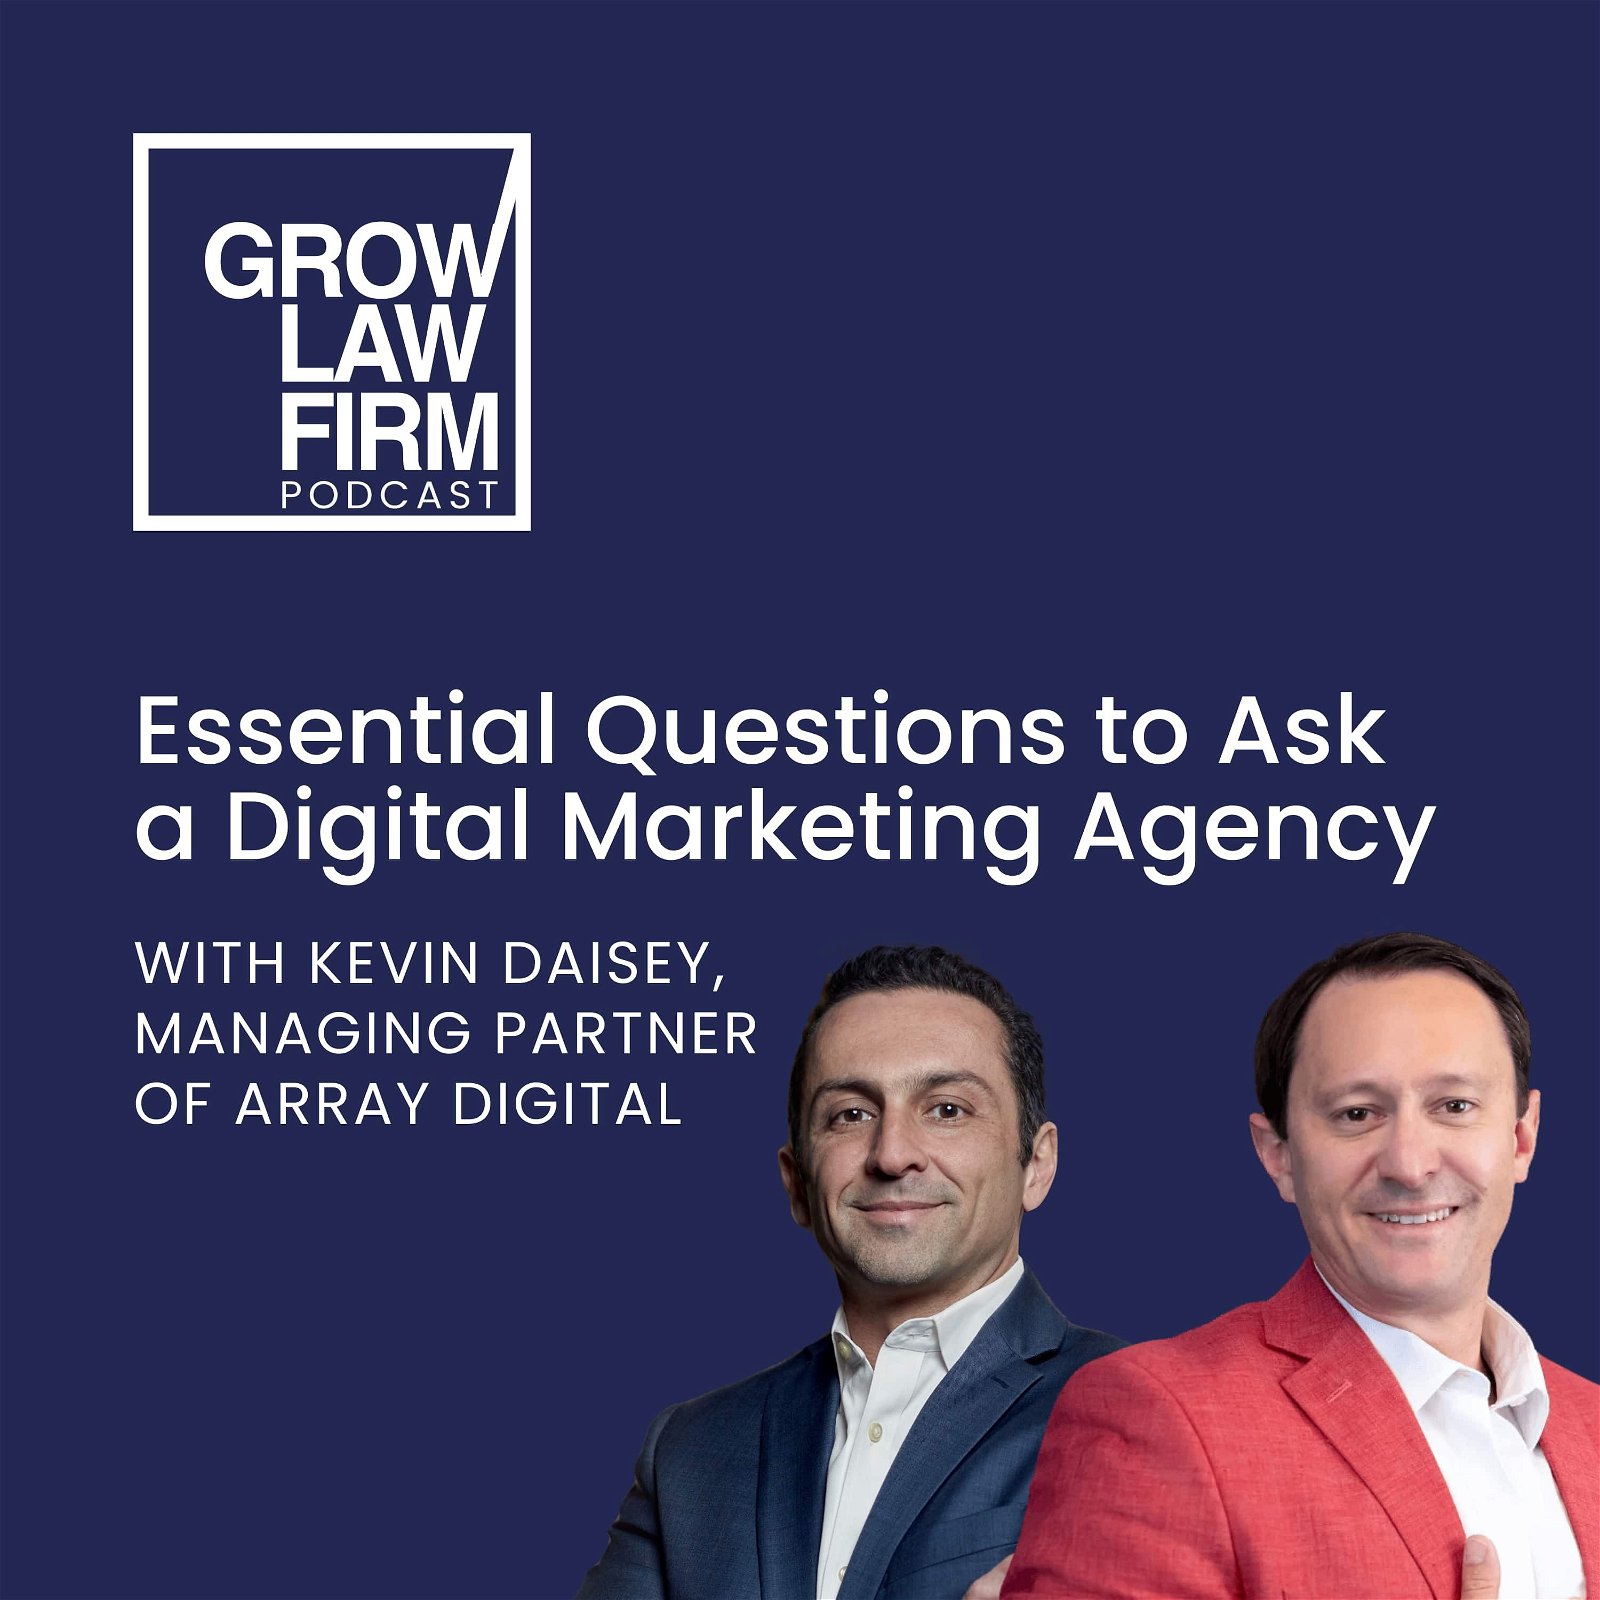 Key Questions to Ask a Digital Marketing Agency with Kevin Daisey, Managing Partner of Array Digital